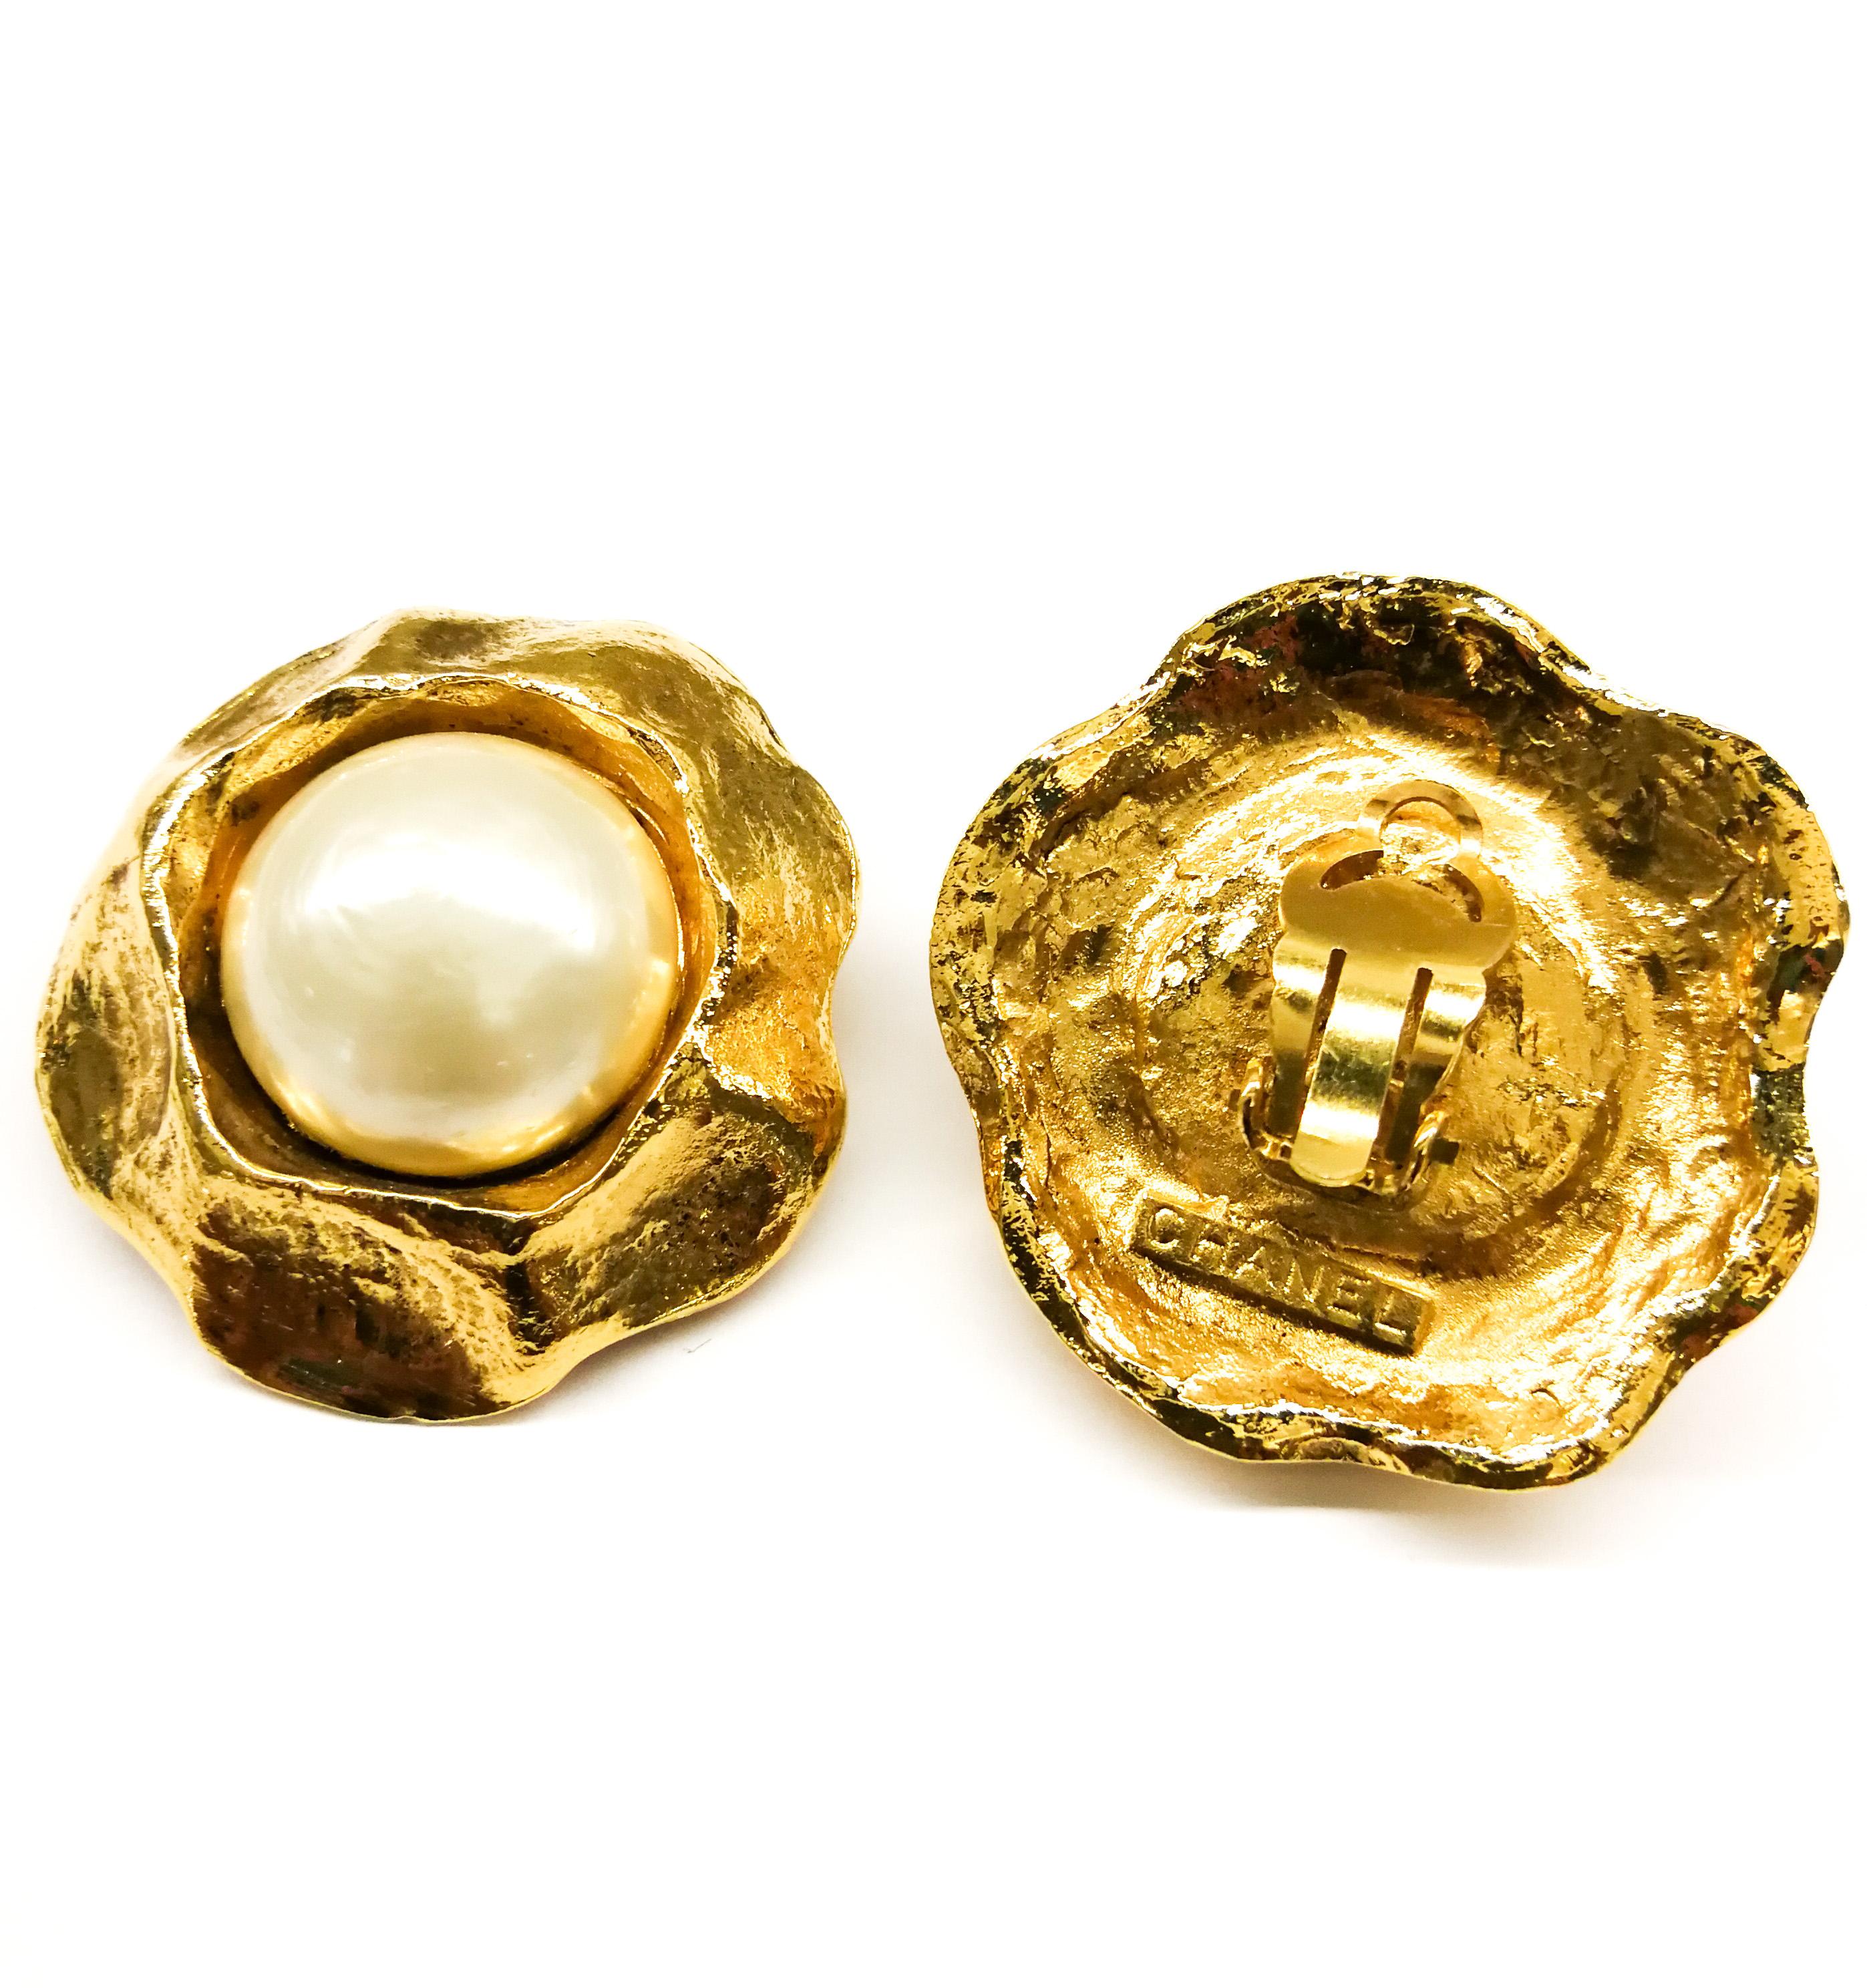 Classic pearl and gilt earrings , designed by Victoire de Castellane for Chanel, with a wide gilt 'thumb indented' border, in which is nestled a larger baroque pearl cabuchon. Very smart, a prime example of Castellane's oeuvre at Chanel at this time